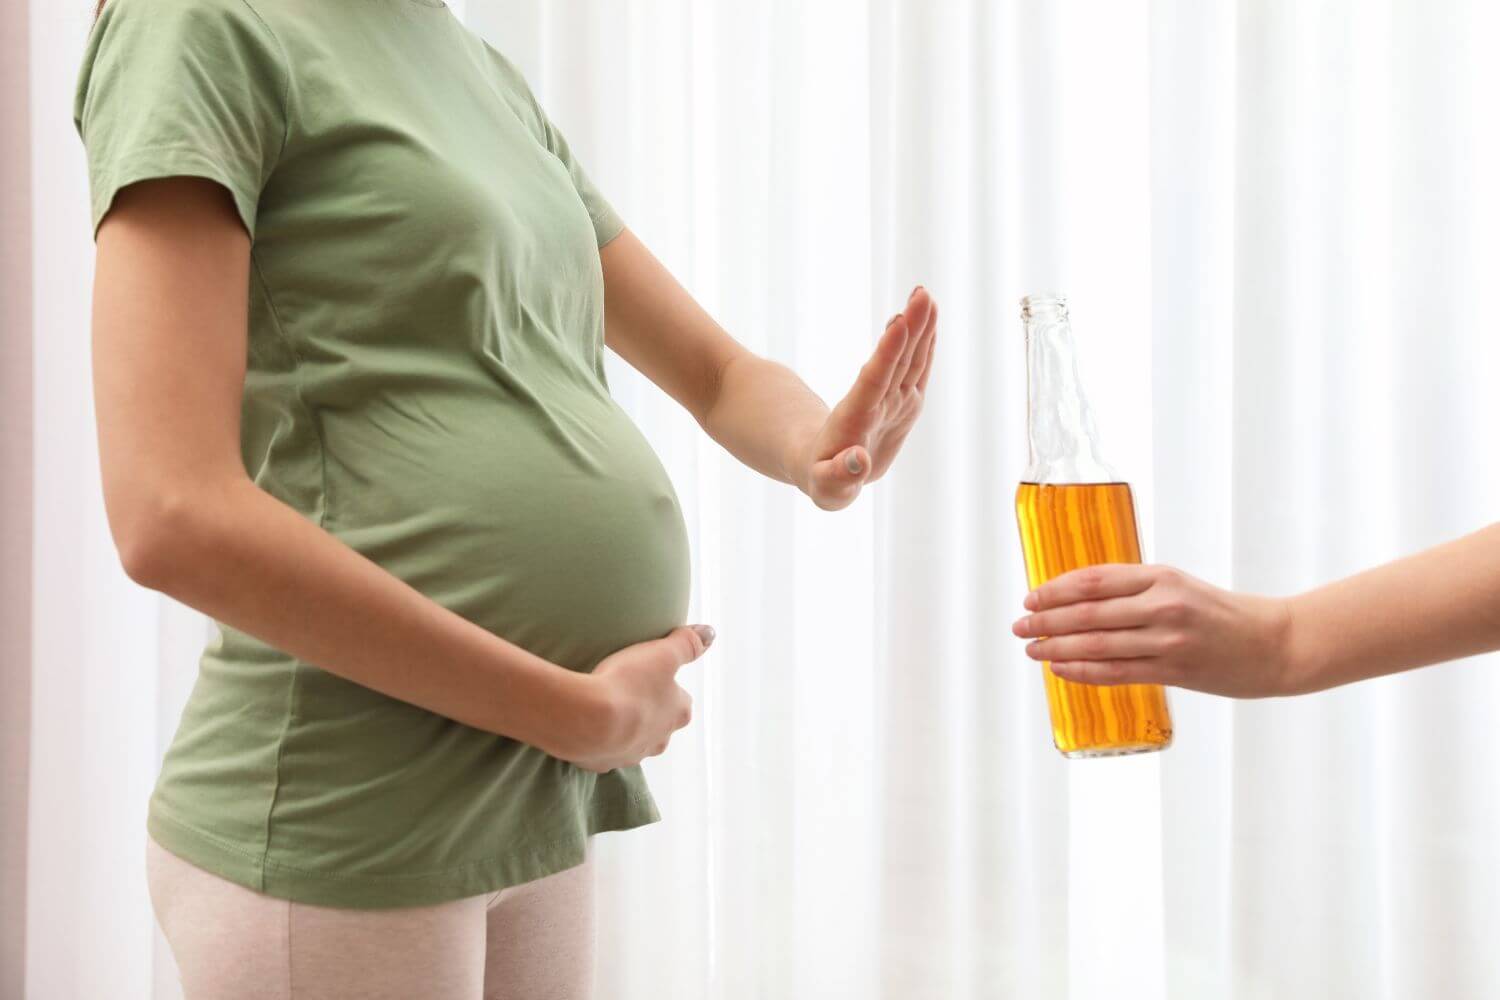 Pregnant woman putting her hand out to deny an alcoholic beverage that's being offered to her